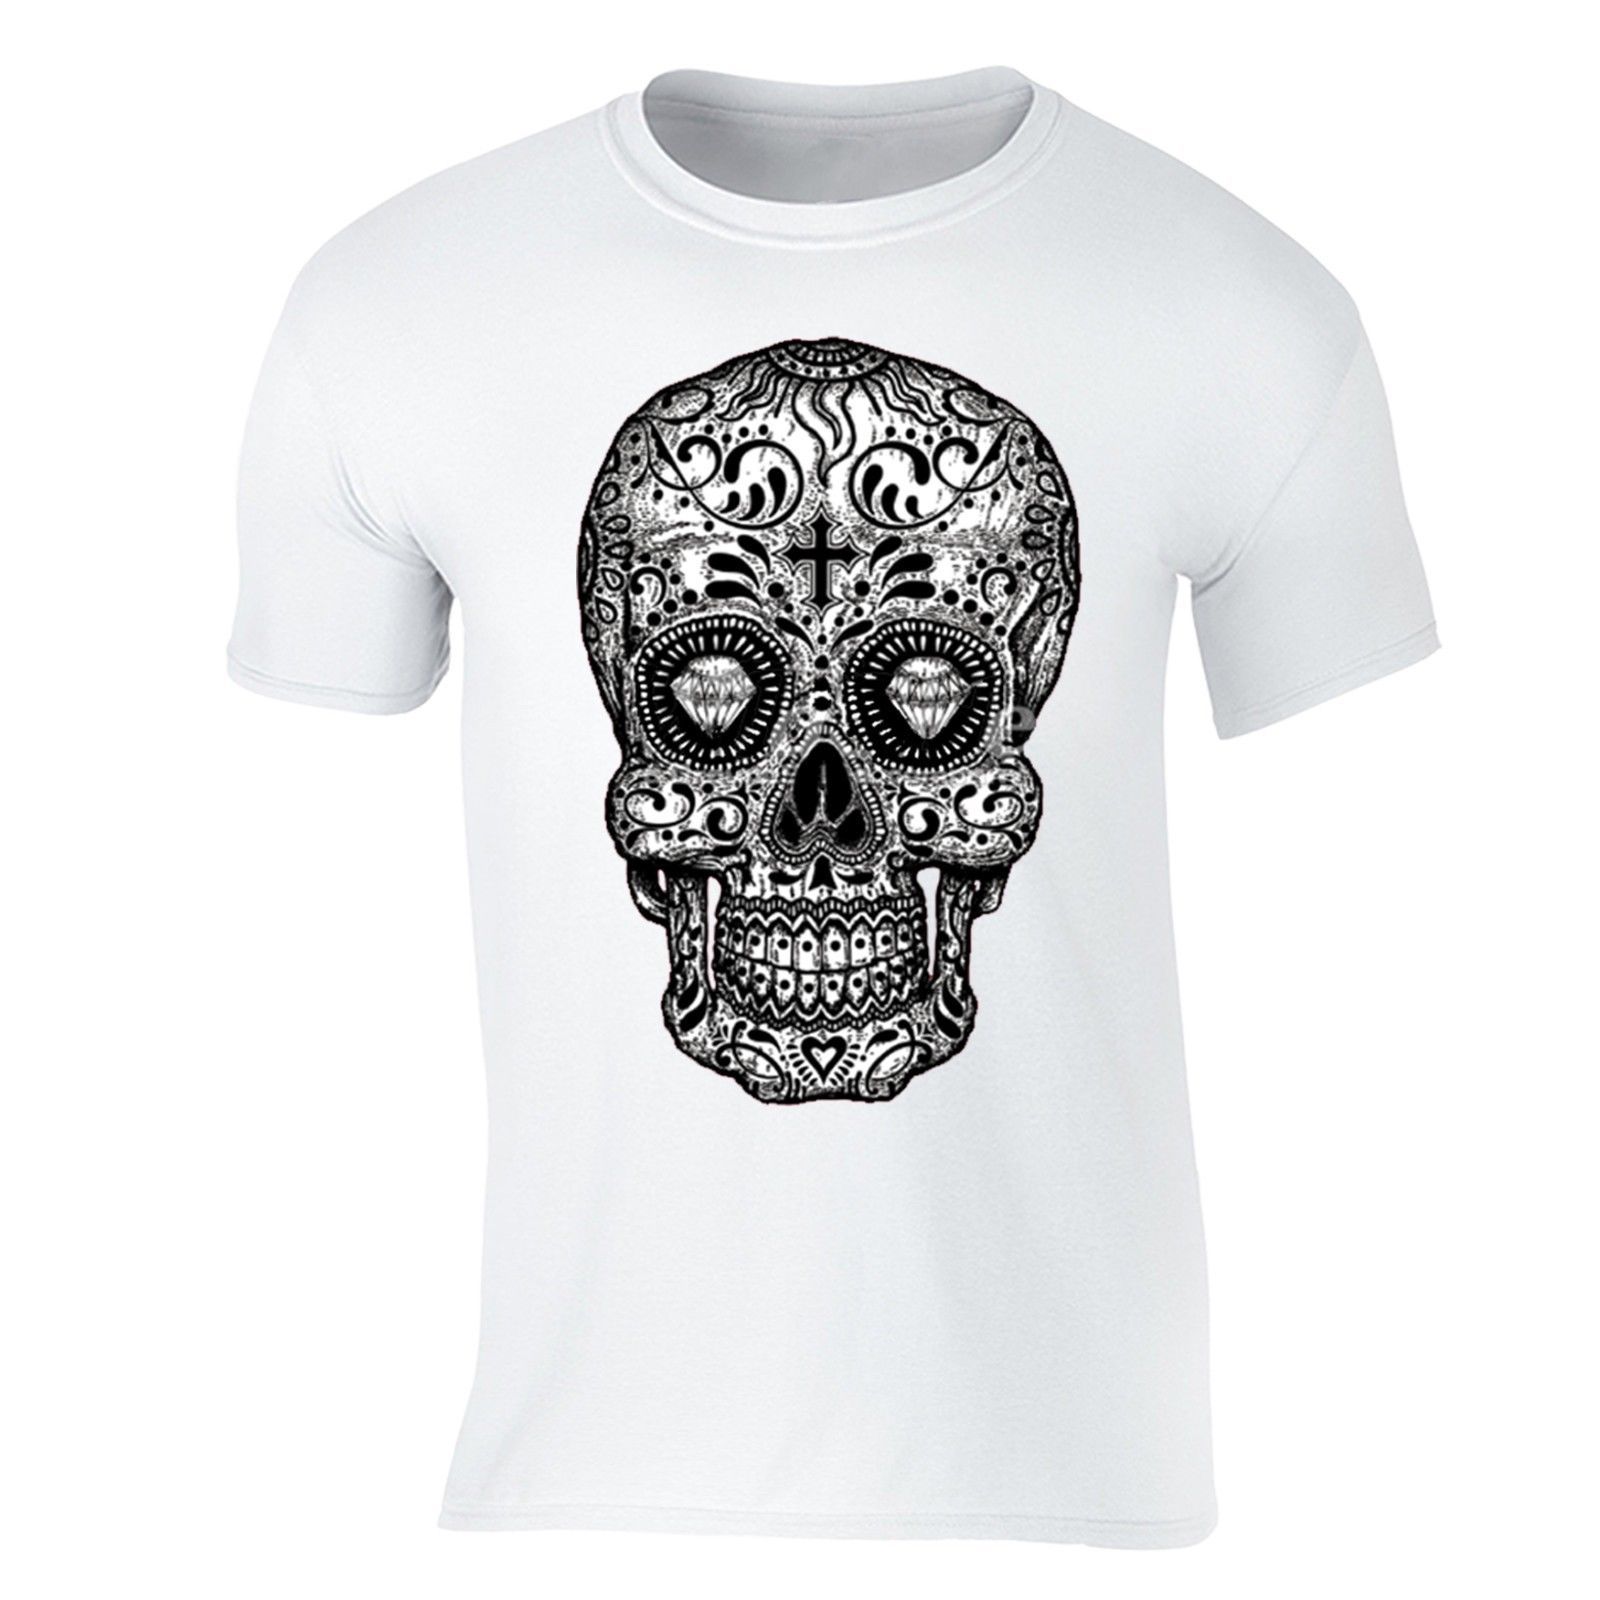 Mexican Skull T shirt Day Of The Dead Goth Rockabilly Printed Graphic Tee